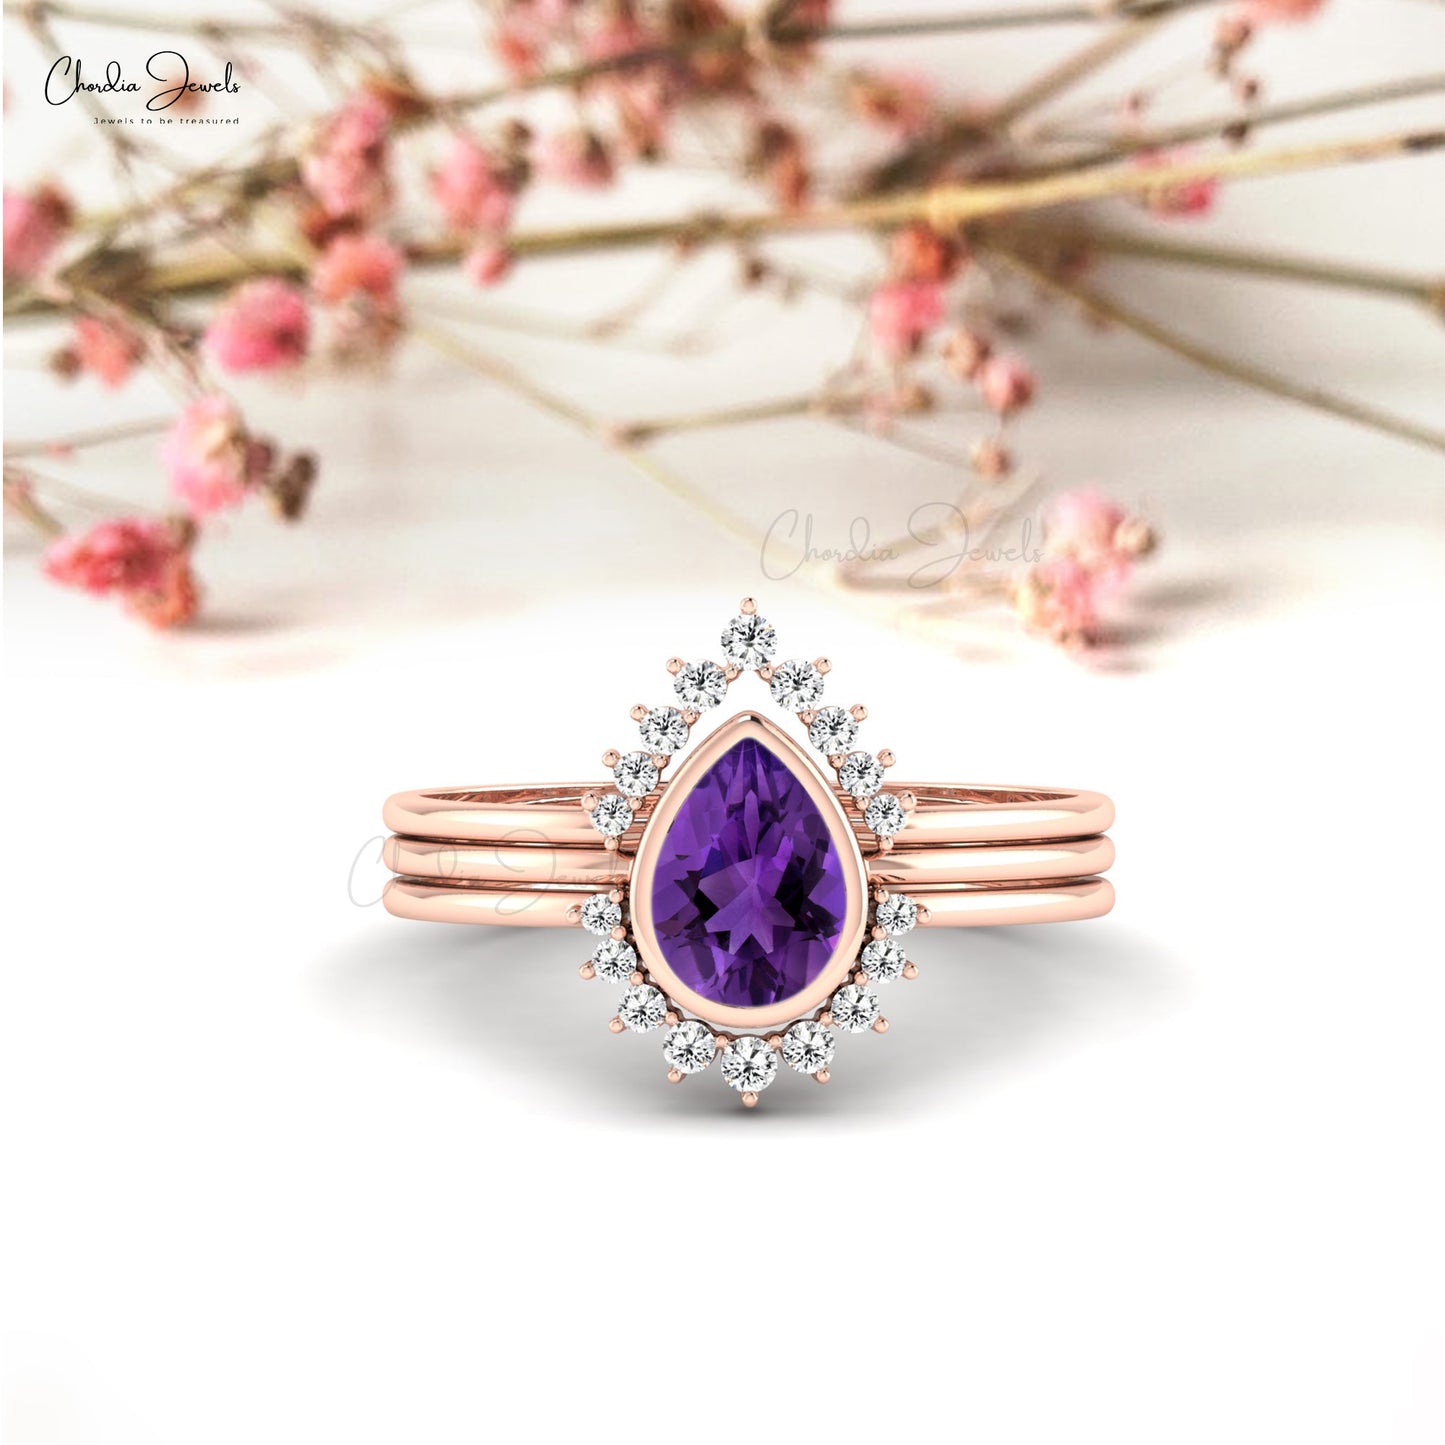 Delicate Amethyst Stackable Ring 14k Real Gold Proposal Ring 7x5mm Pear Cut Gemstone Hallmarked Fine Jewelry For Birthday Gift